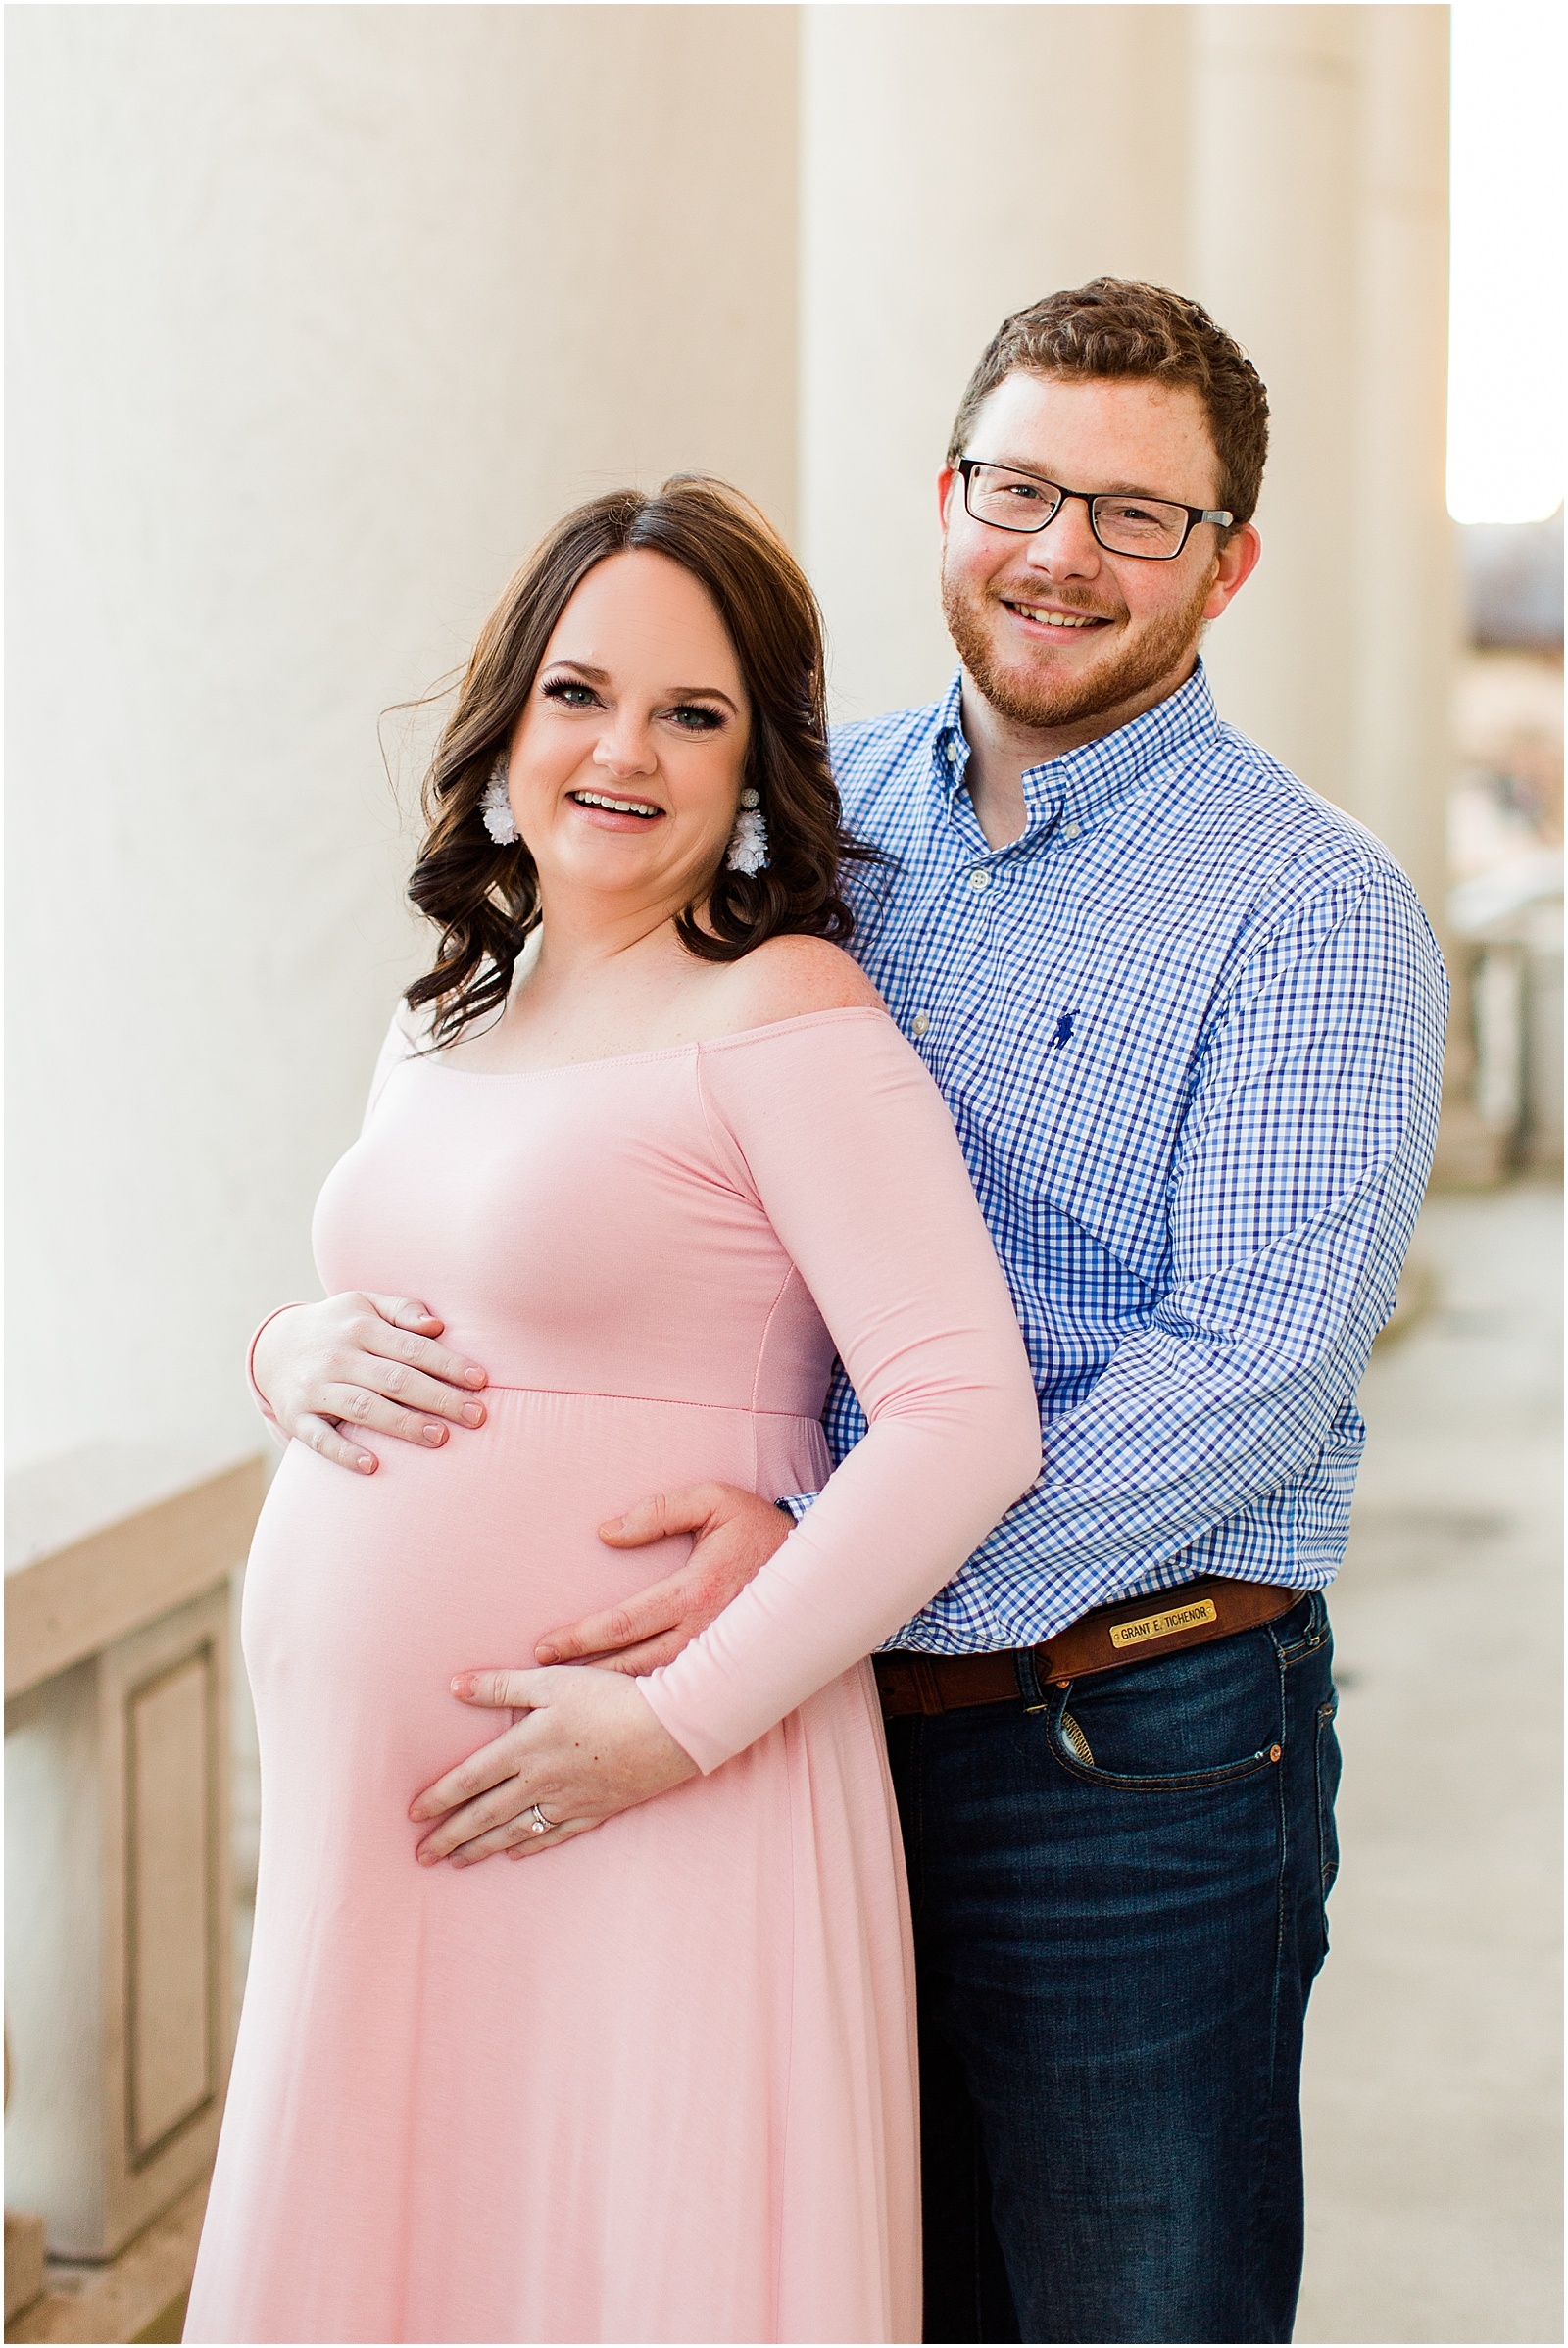 A Downtown Owensboro Maternity Session | Kayla and Grant Evansville Indiana Wedding Photographers-0013.jpg